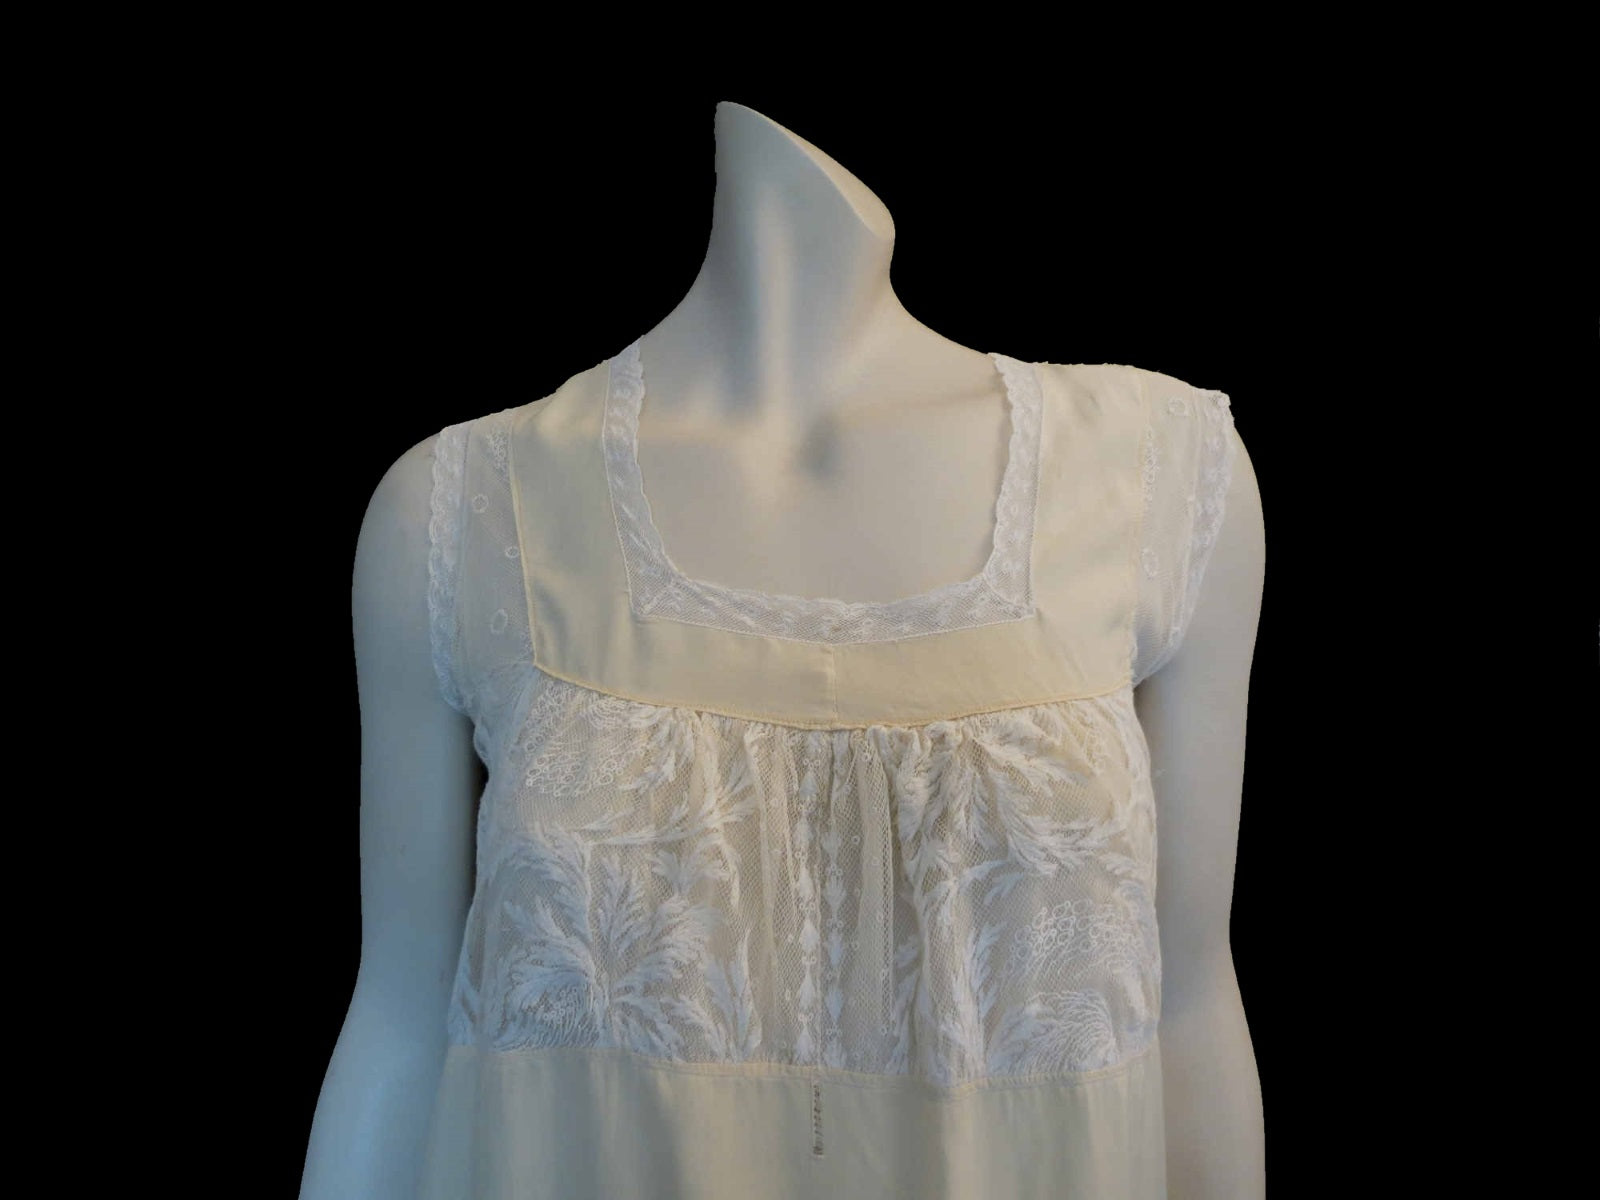 vintage antique 1910s 1920s nightgown with lace bodice cream rayon with cotton lace